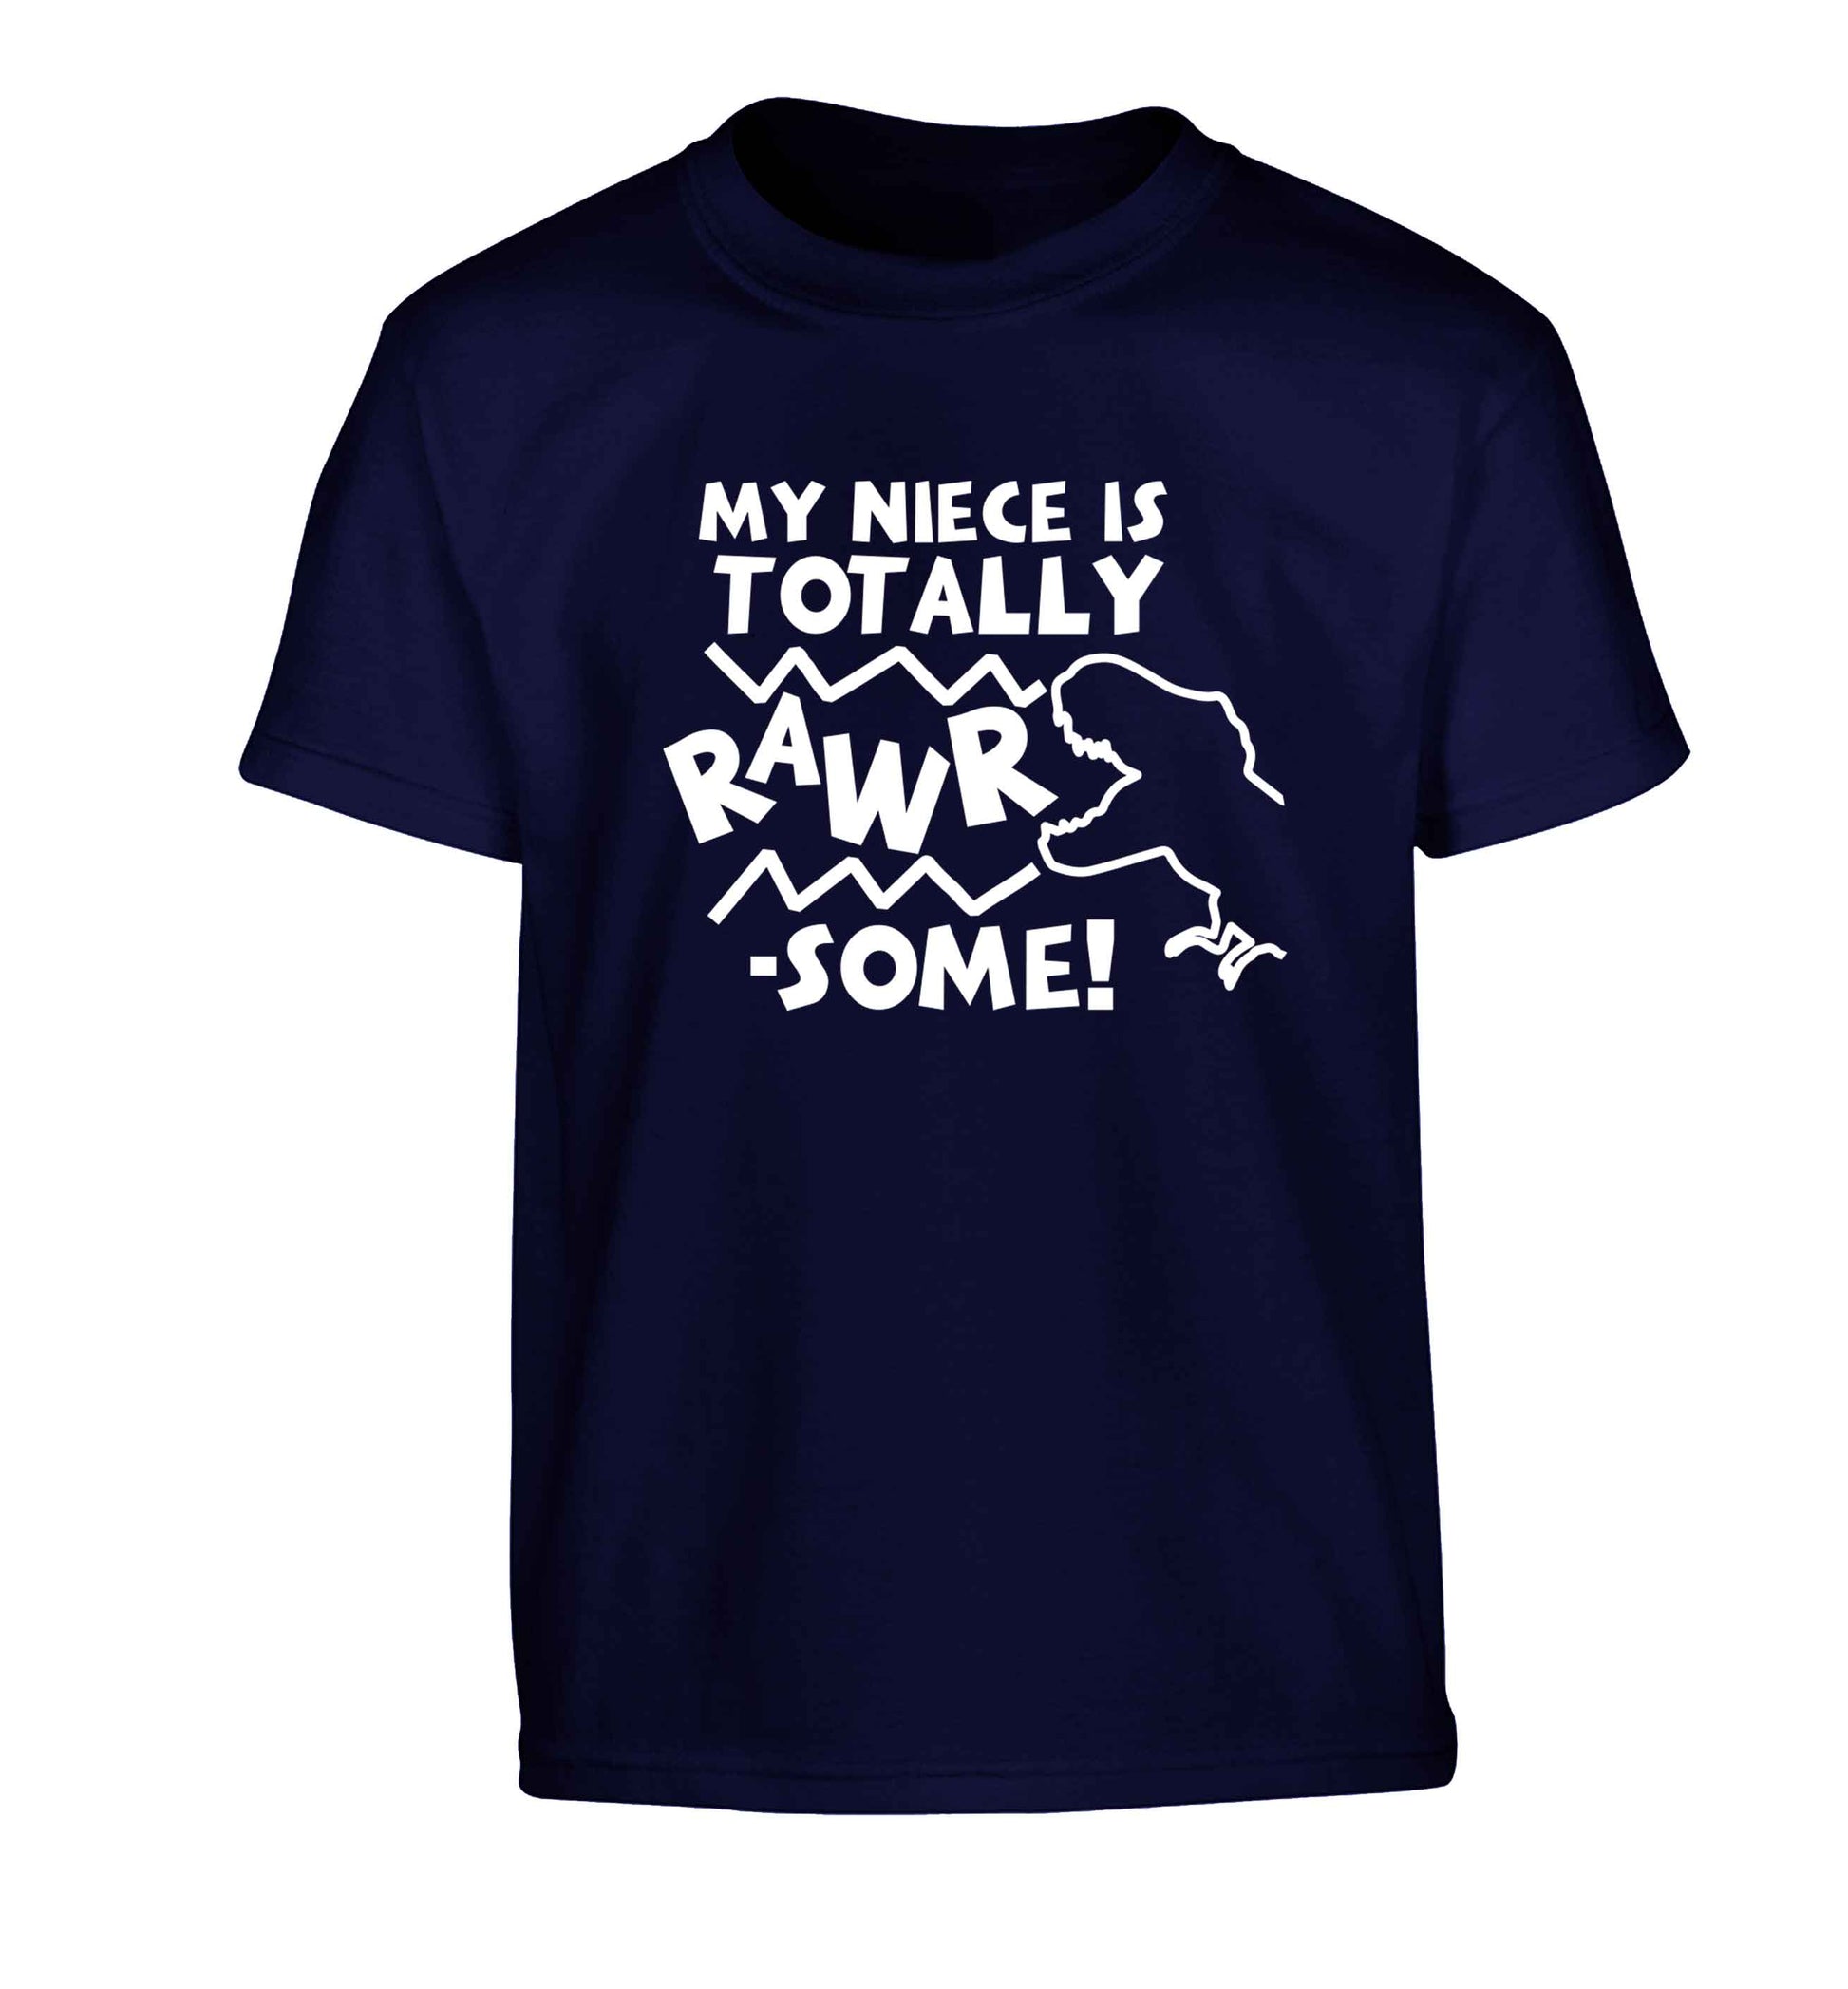 My niece is totally rawrsome Children's navy Tshirt 12-13 Years